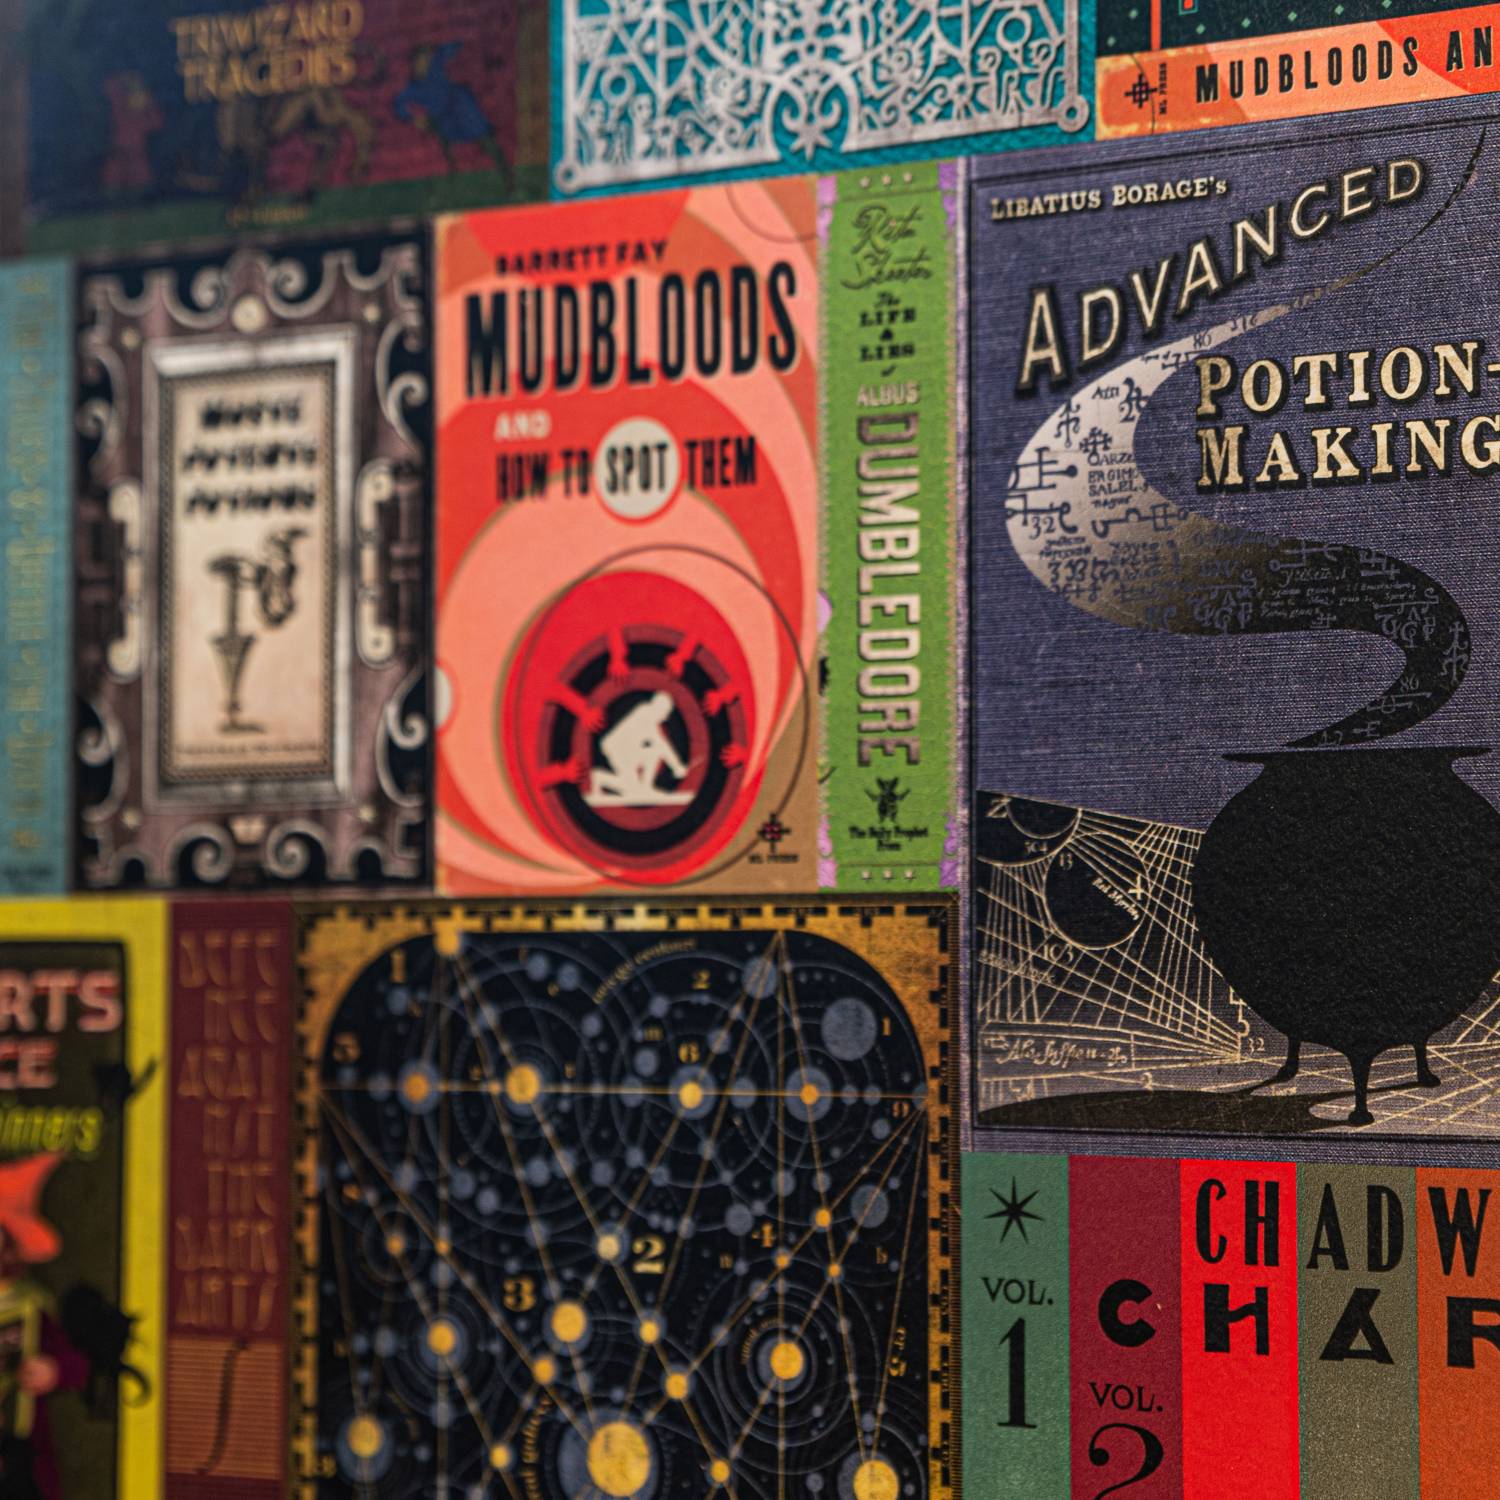 Hogwarts Library Book Covers Wallpaper